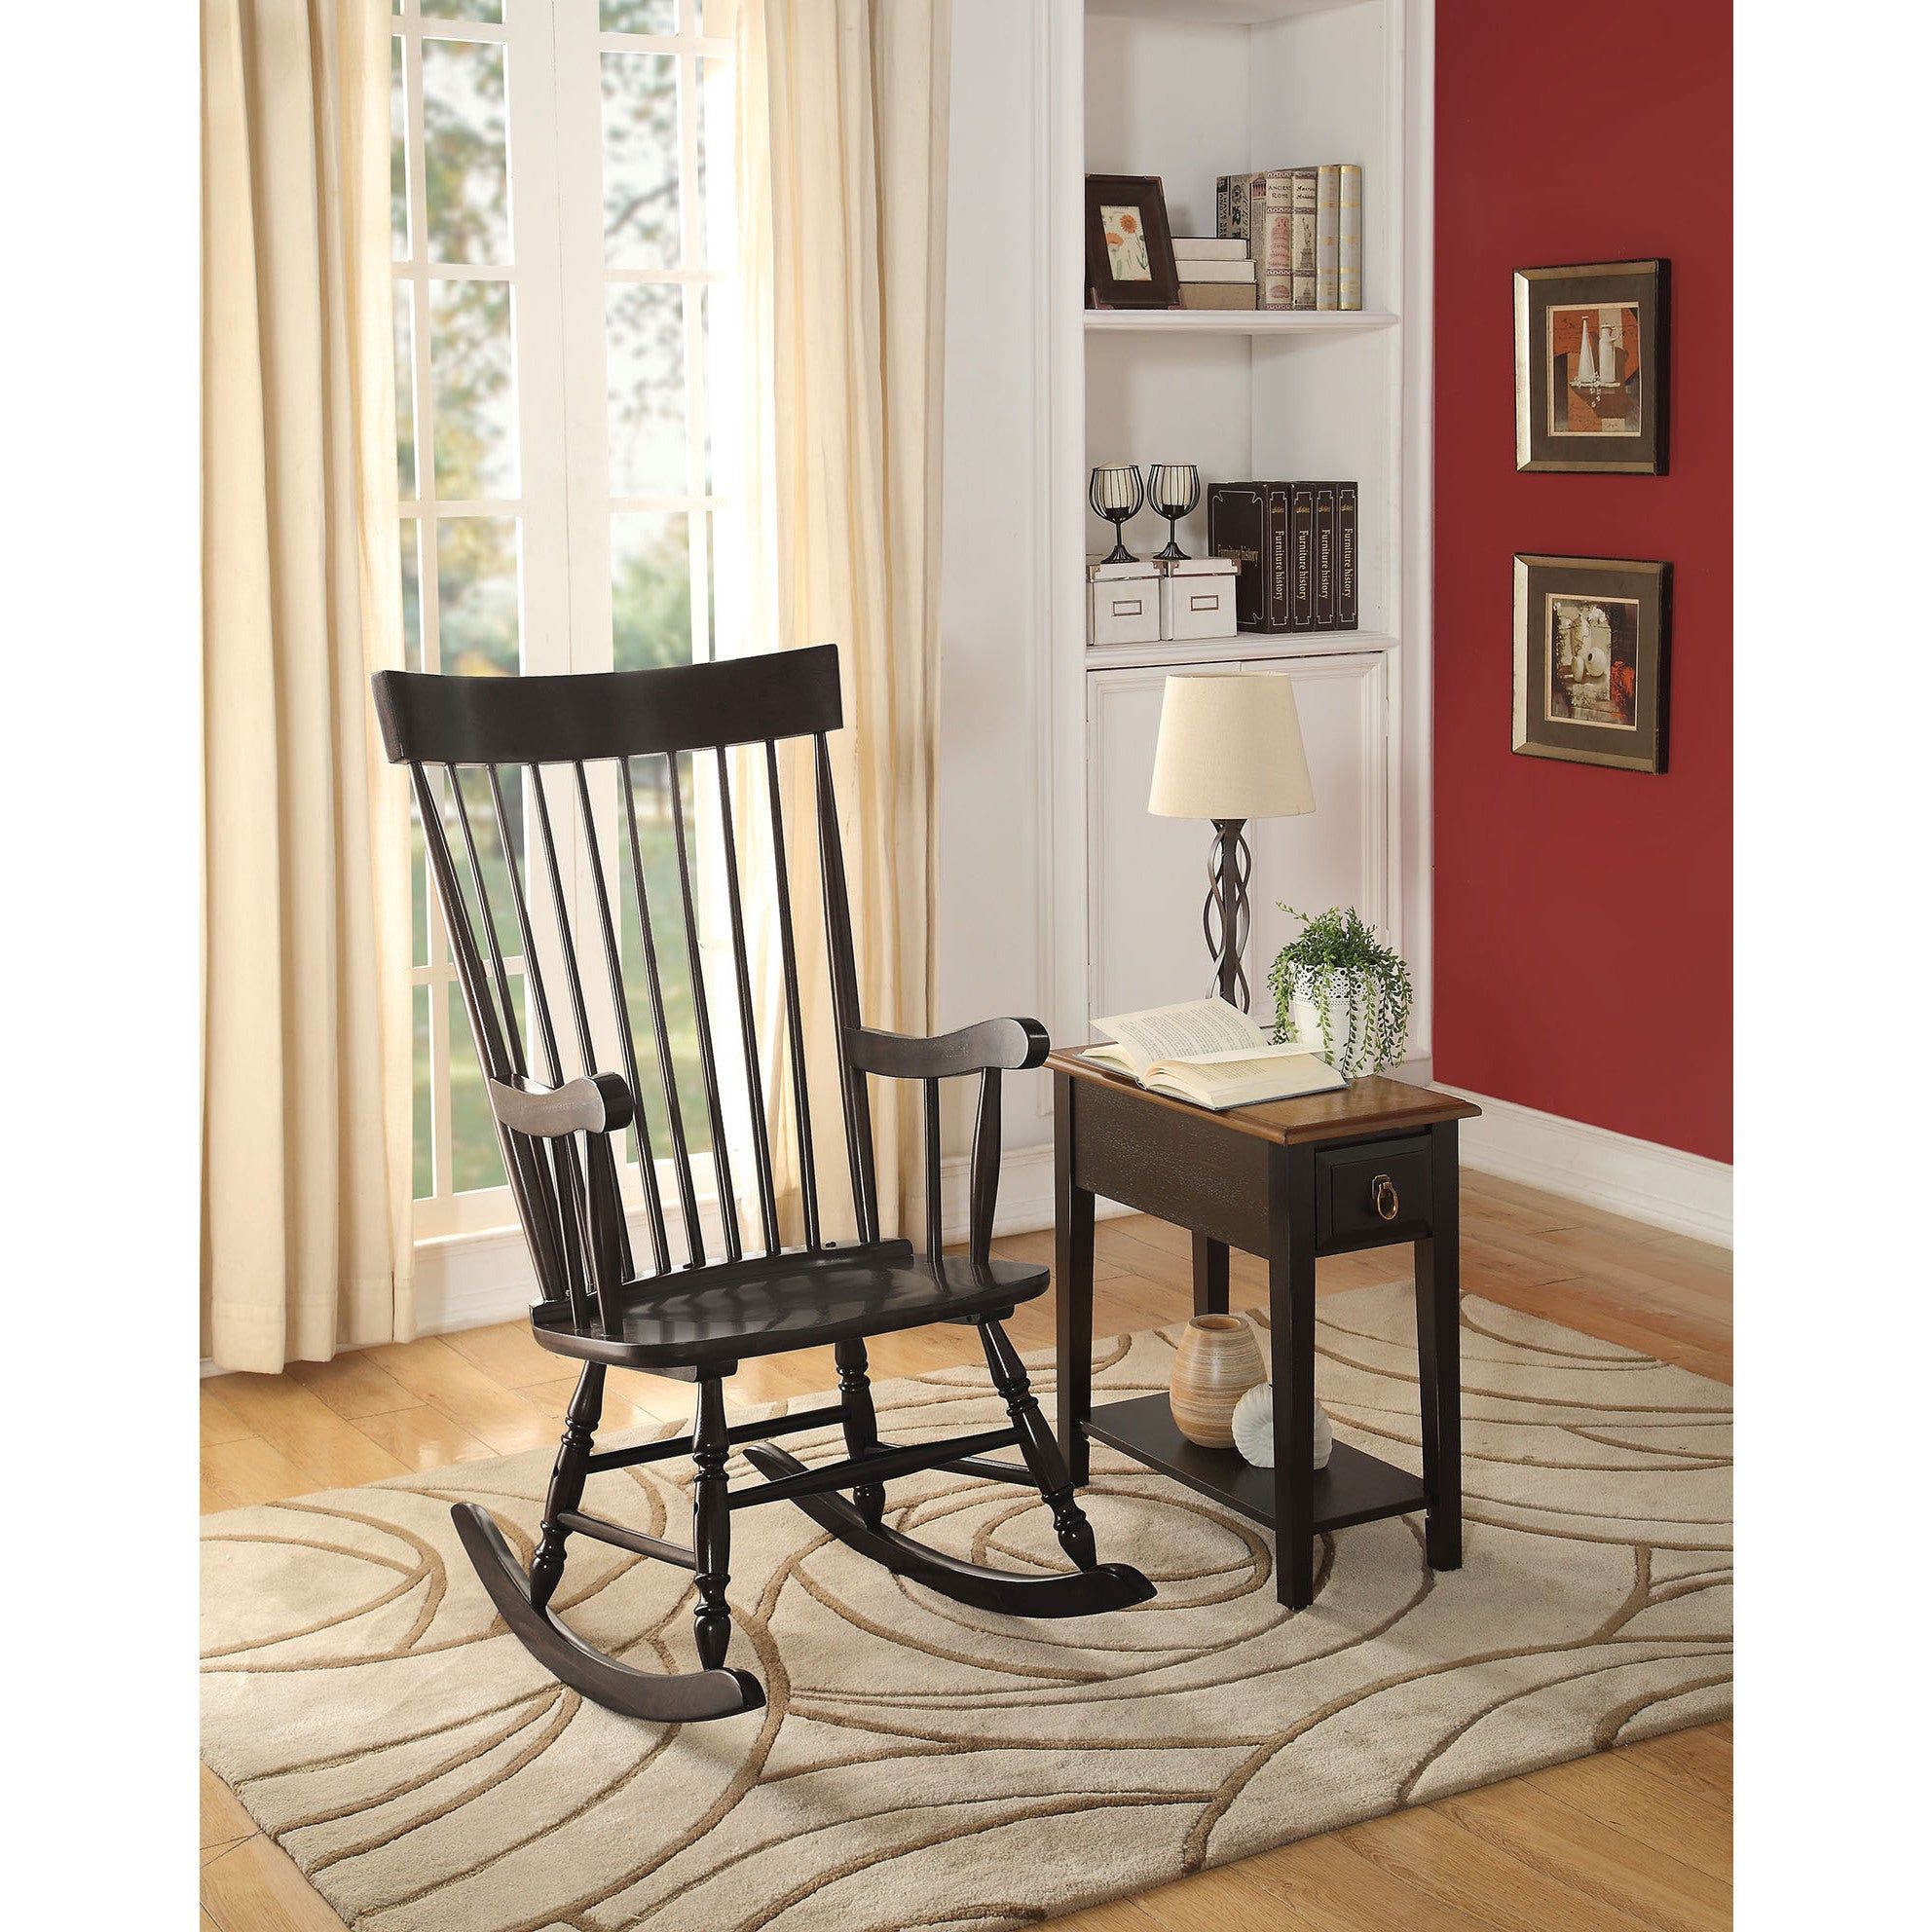 Buy Rocking Chairs, Traditional Living Room Chairs Online At For Judson Traditional Rocking Chairs (View 12 of 20)